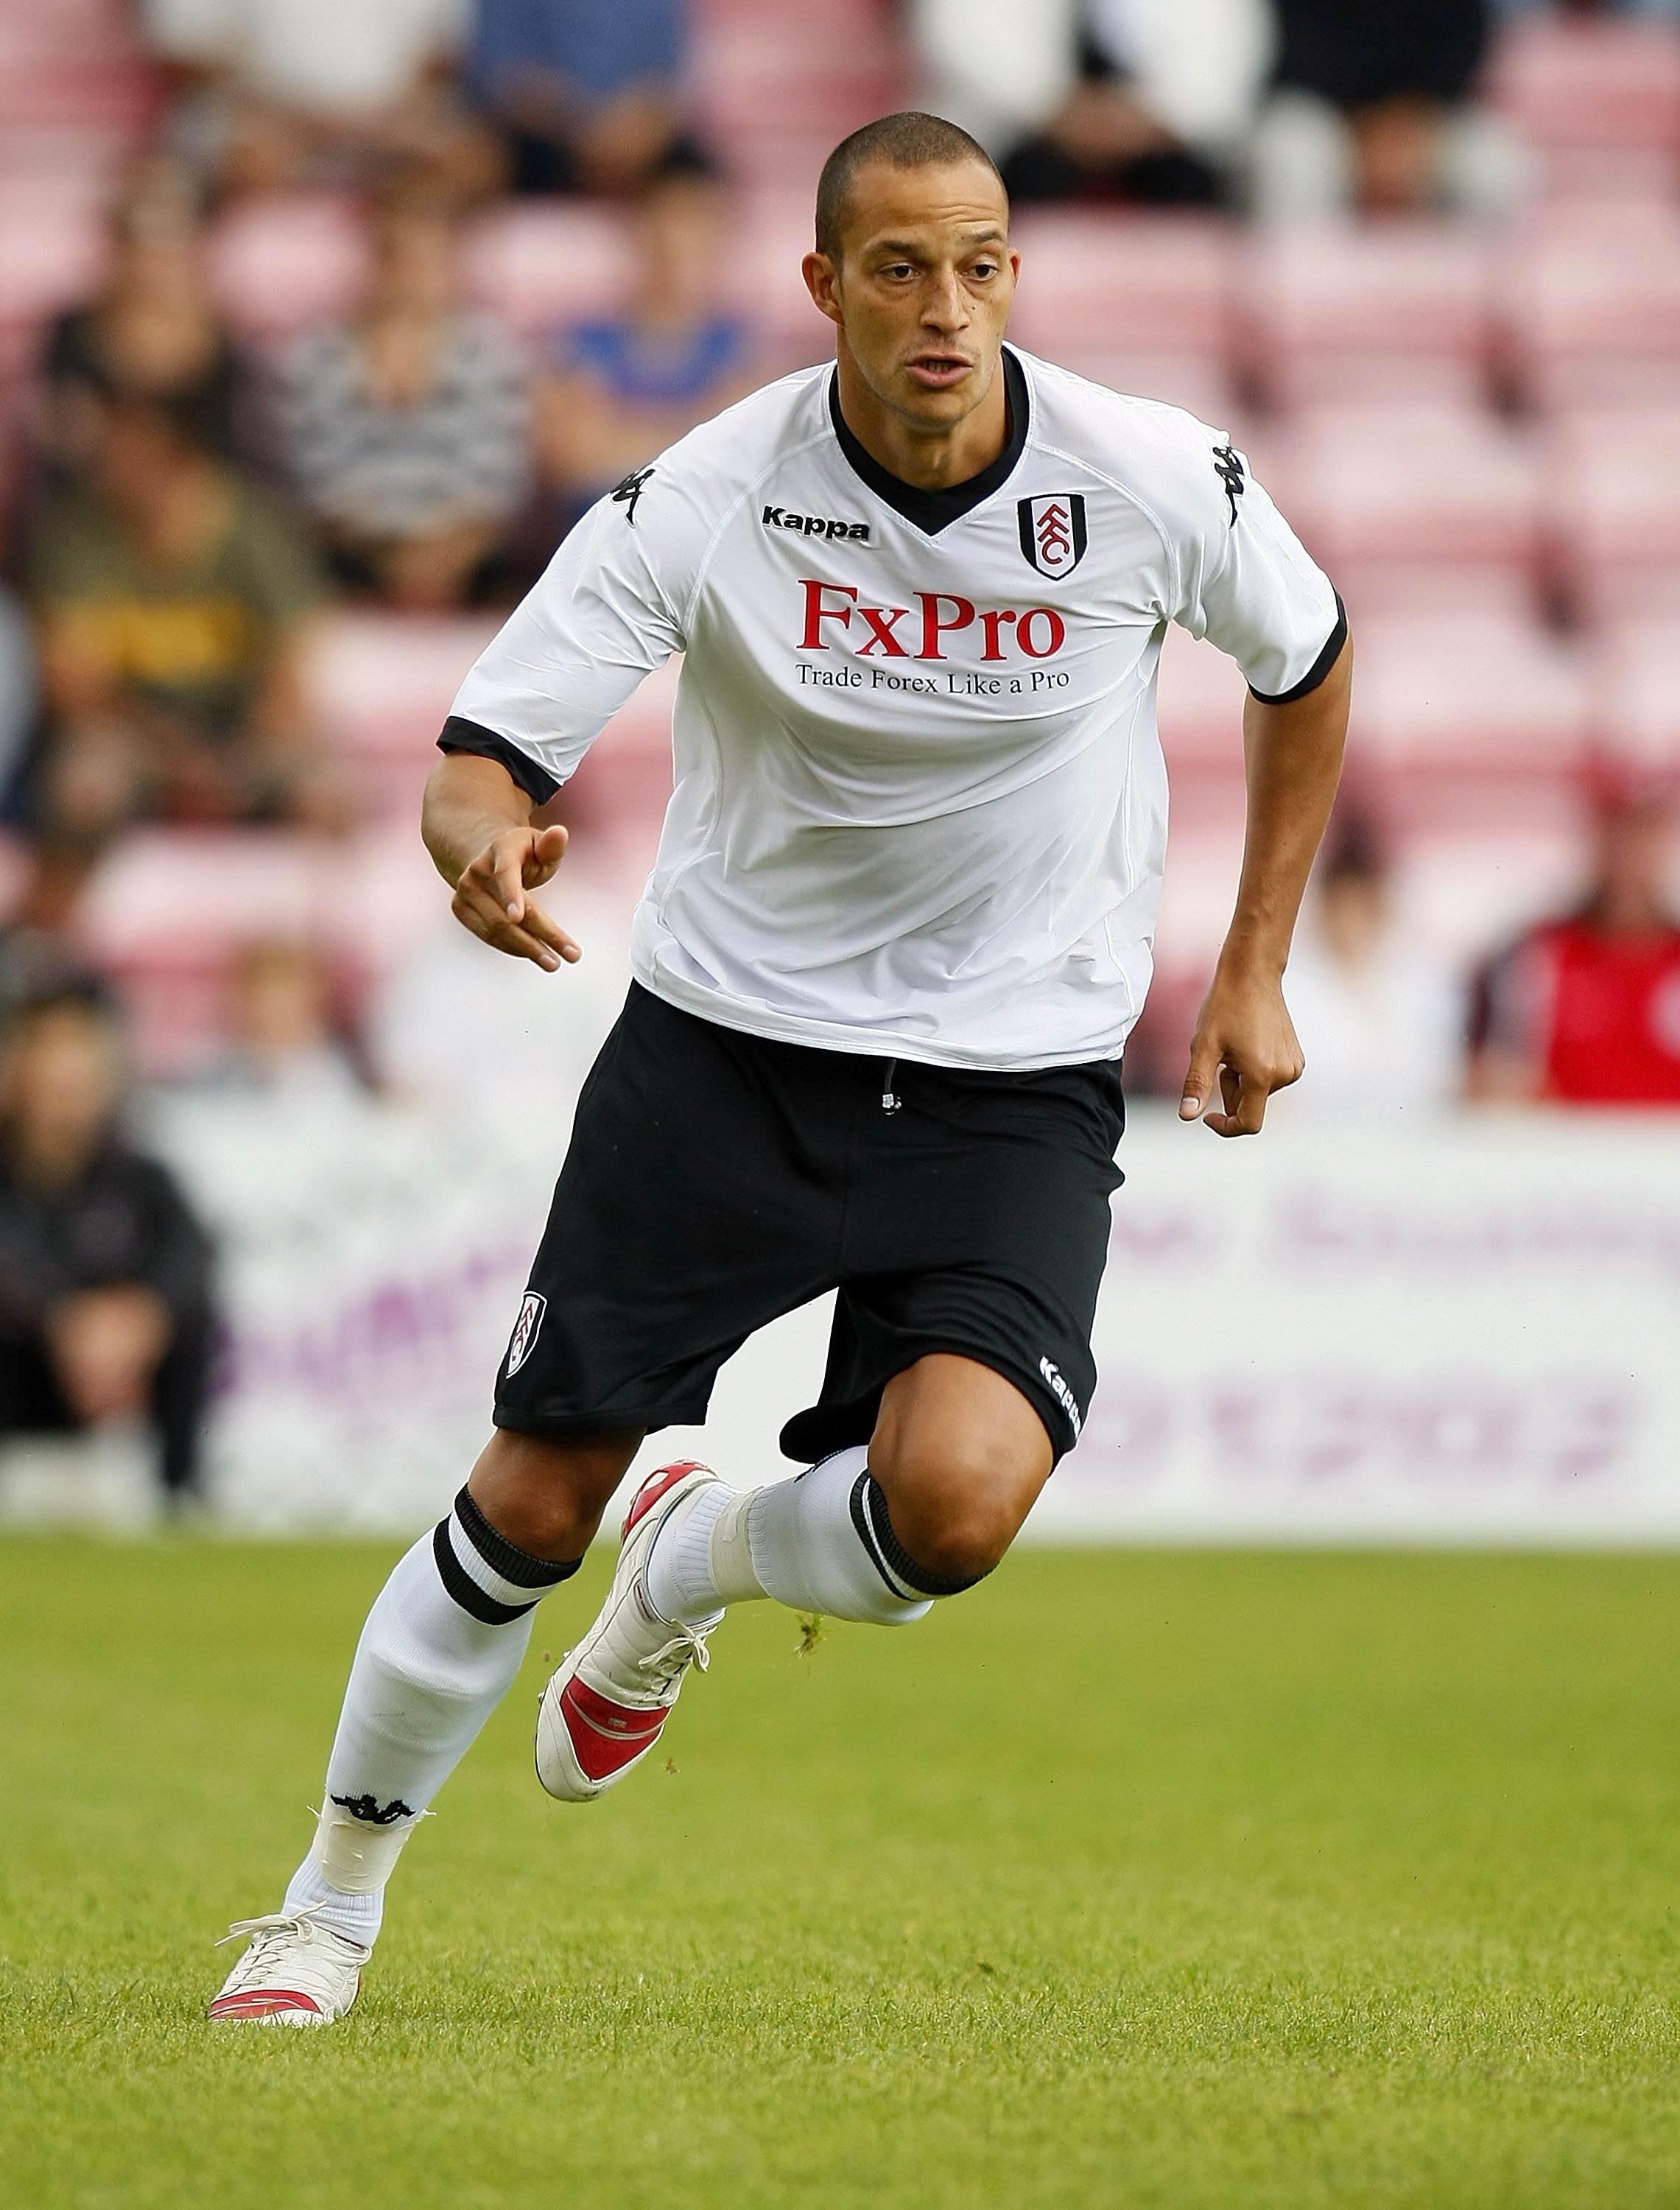 BOURNEMOUTH, ENGLAND - JULY 17: Bobby Zamora of Fulham in action during the pre season friendly match between AFC Bournemouth and Fulham at the Fitness First Stadium on July 17, 2010 in Bournemouth, England. (Photo by Tom Dulat/Getty Images)